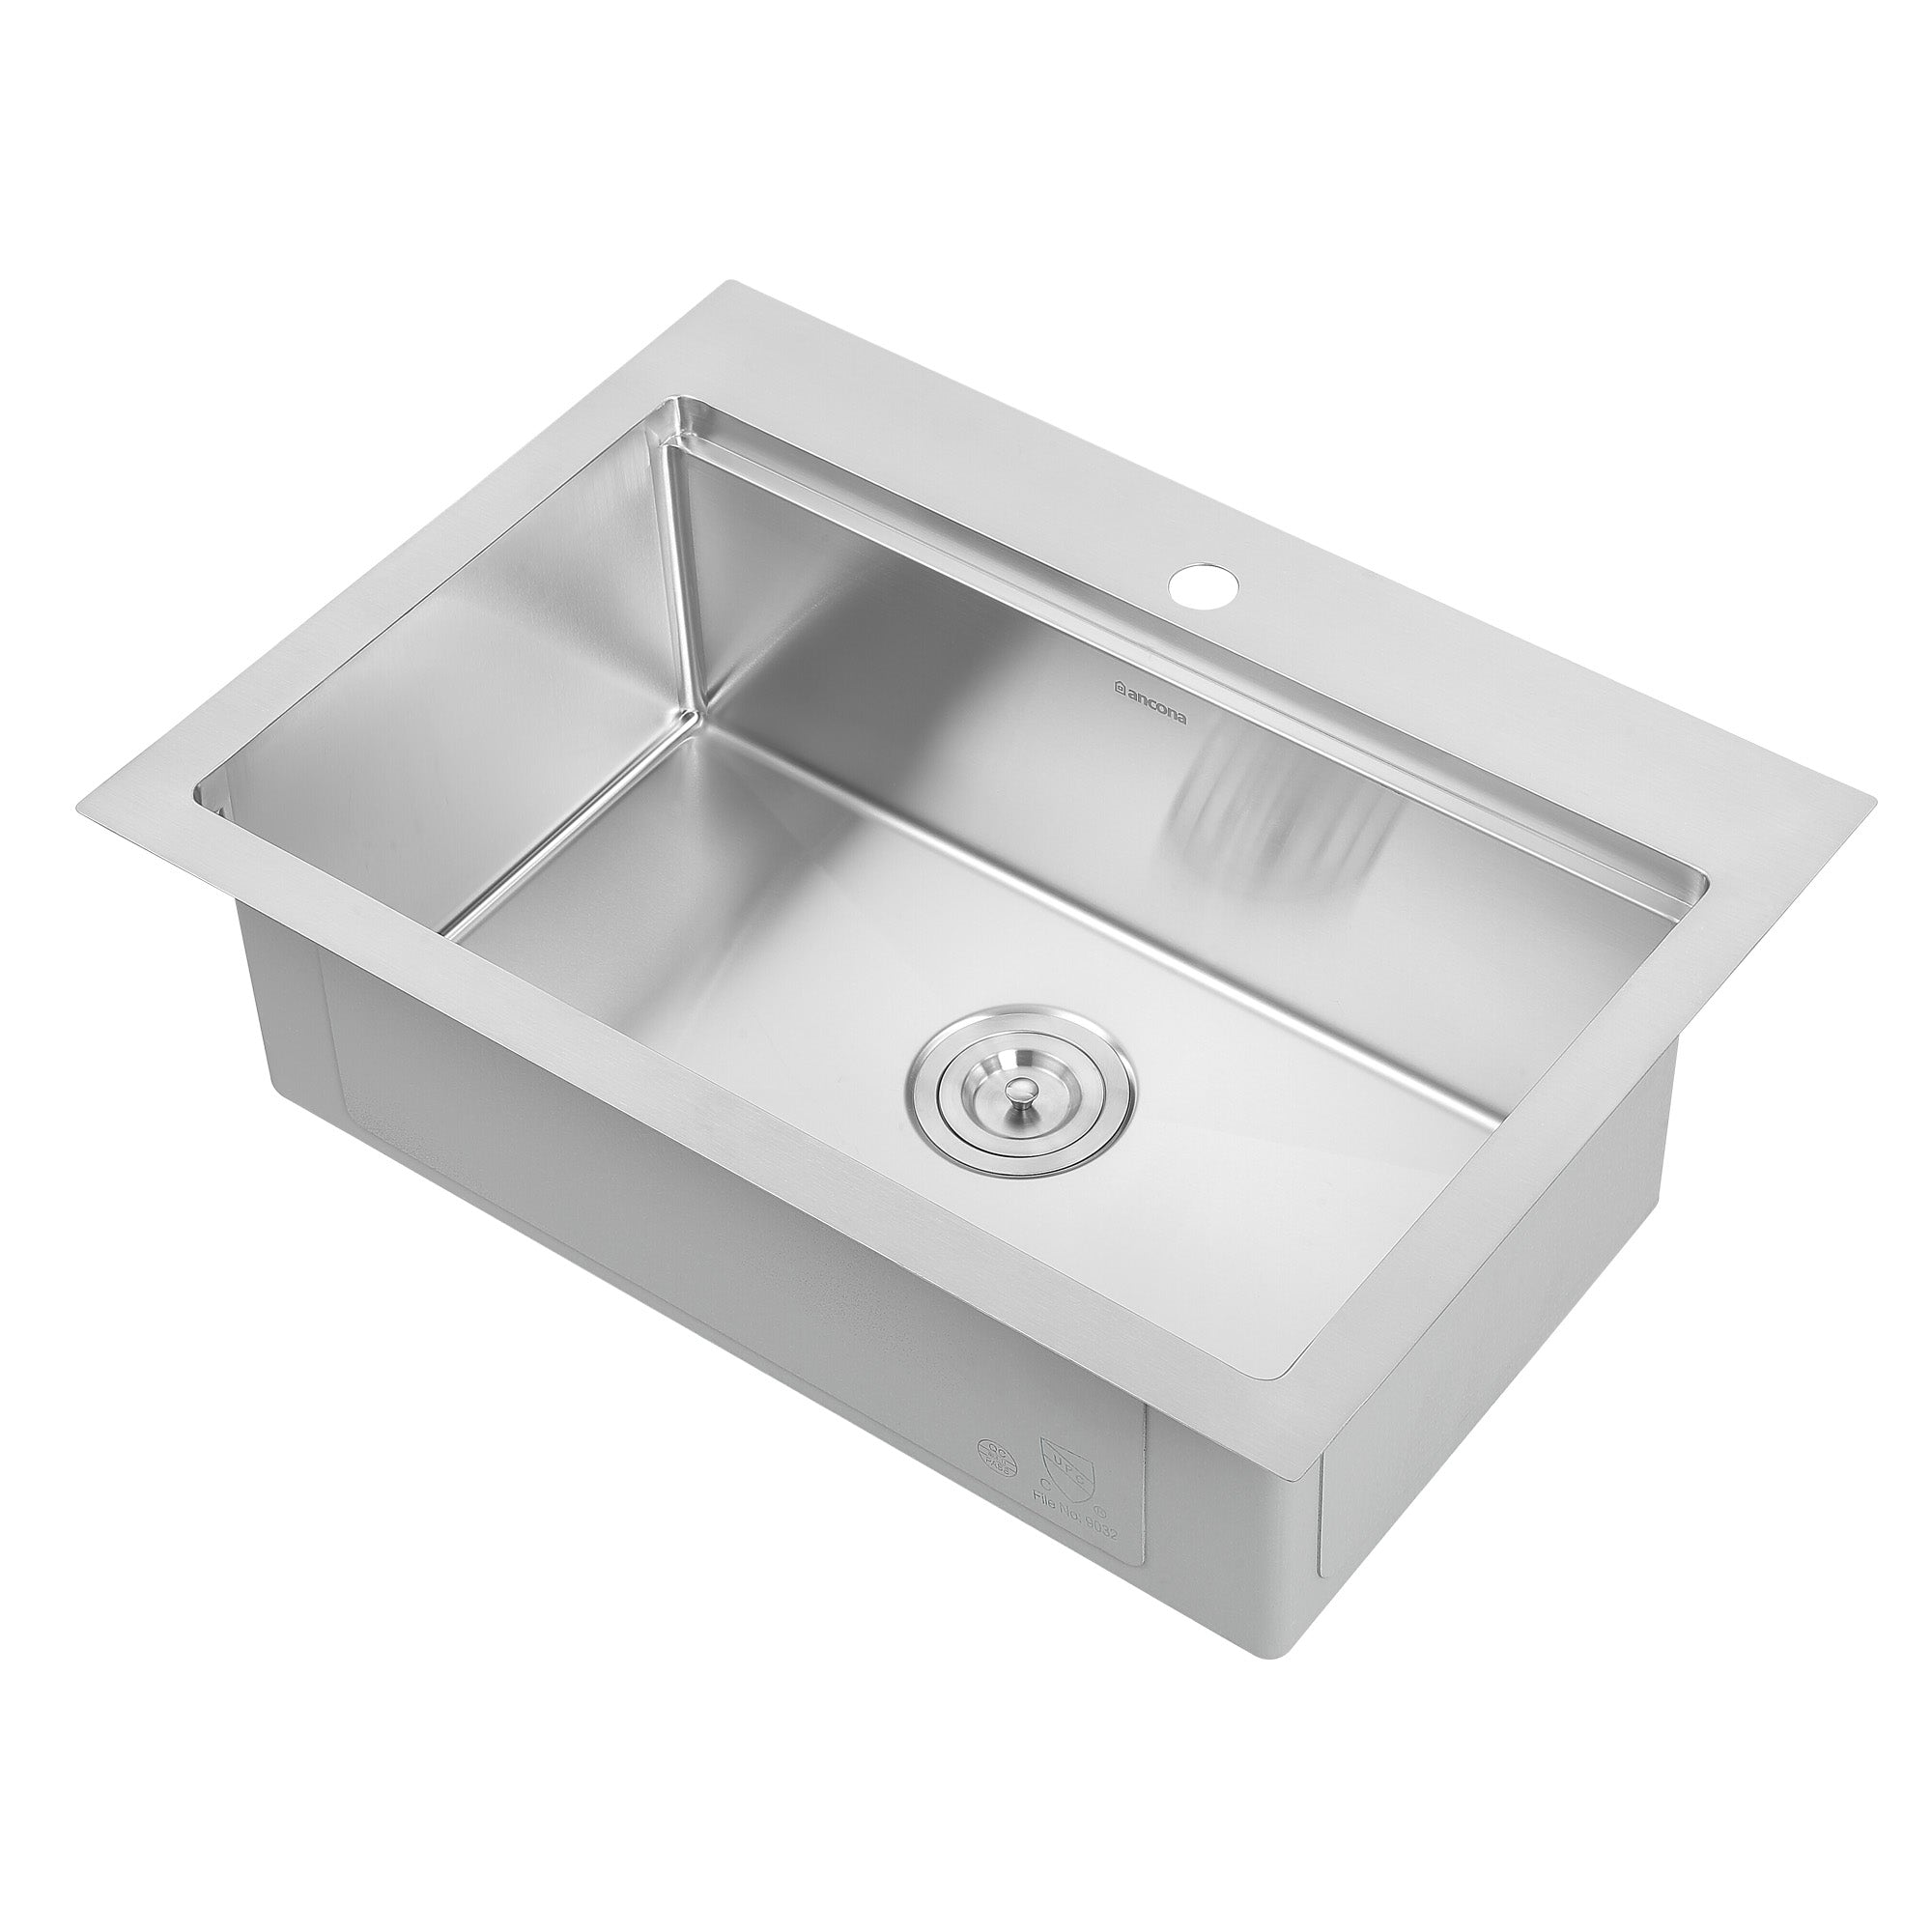 Ancona Handcrafted Dual Mount 28” Single Bowl Workstation Kitchen Sink in Satin Stainless Steel with Accessories